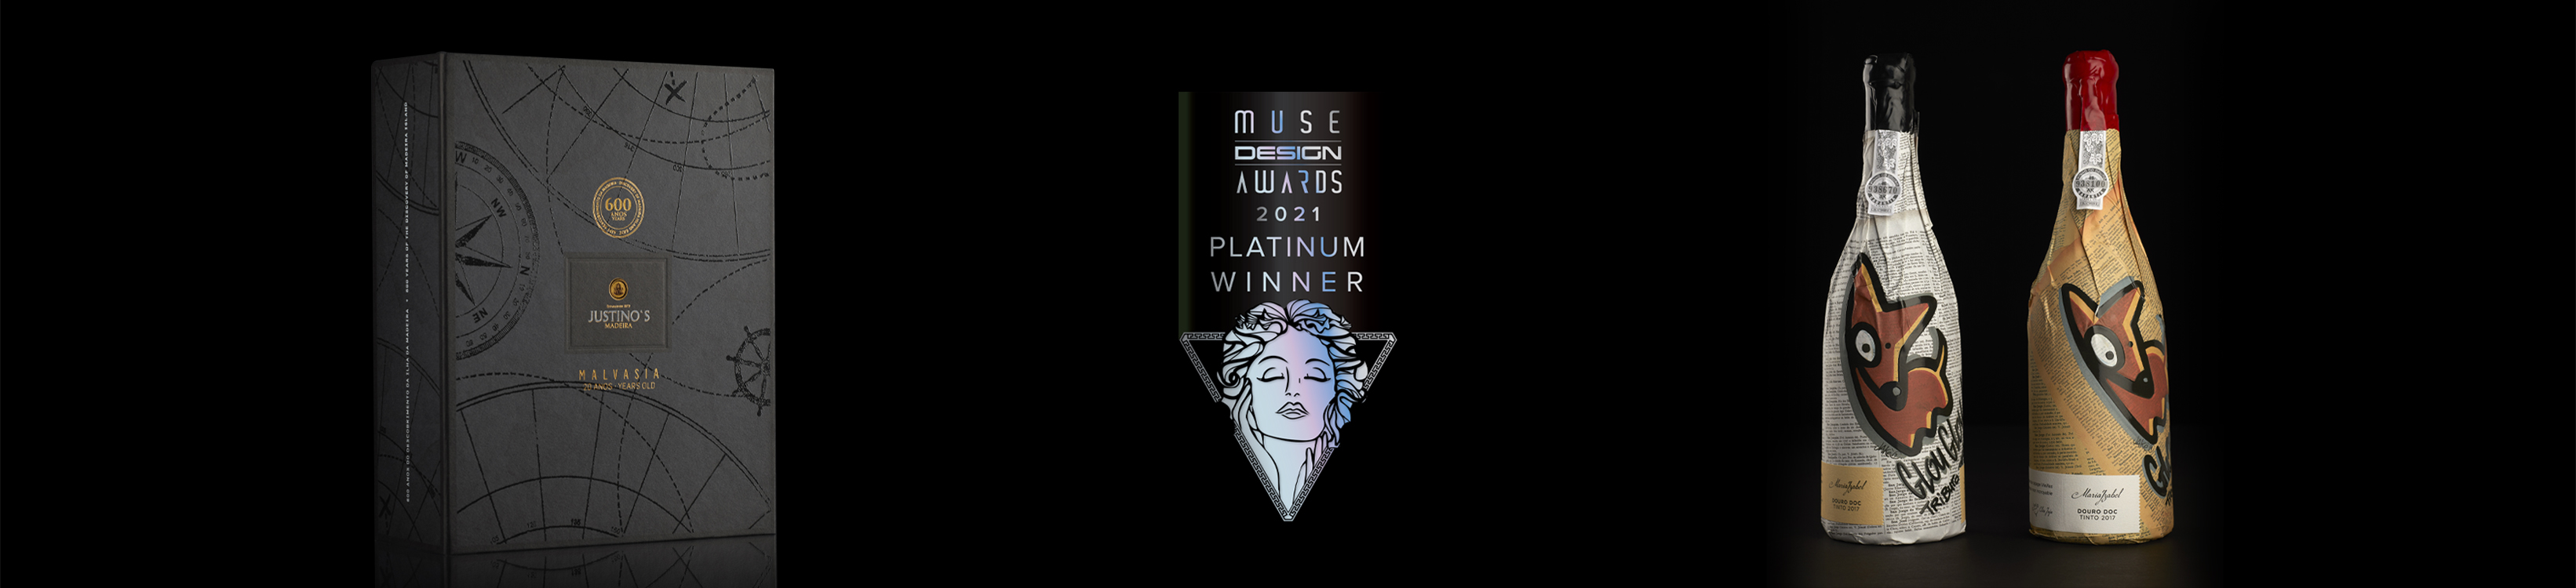 Omdesign was multi-awarded in the USA at the Muse Awards 2021